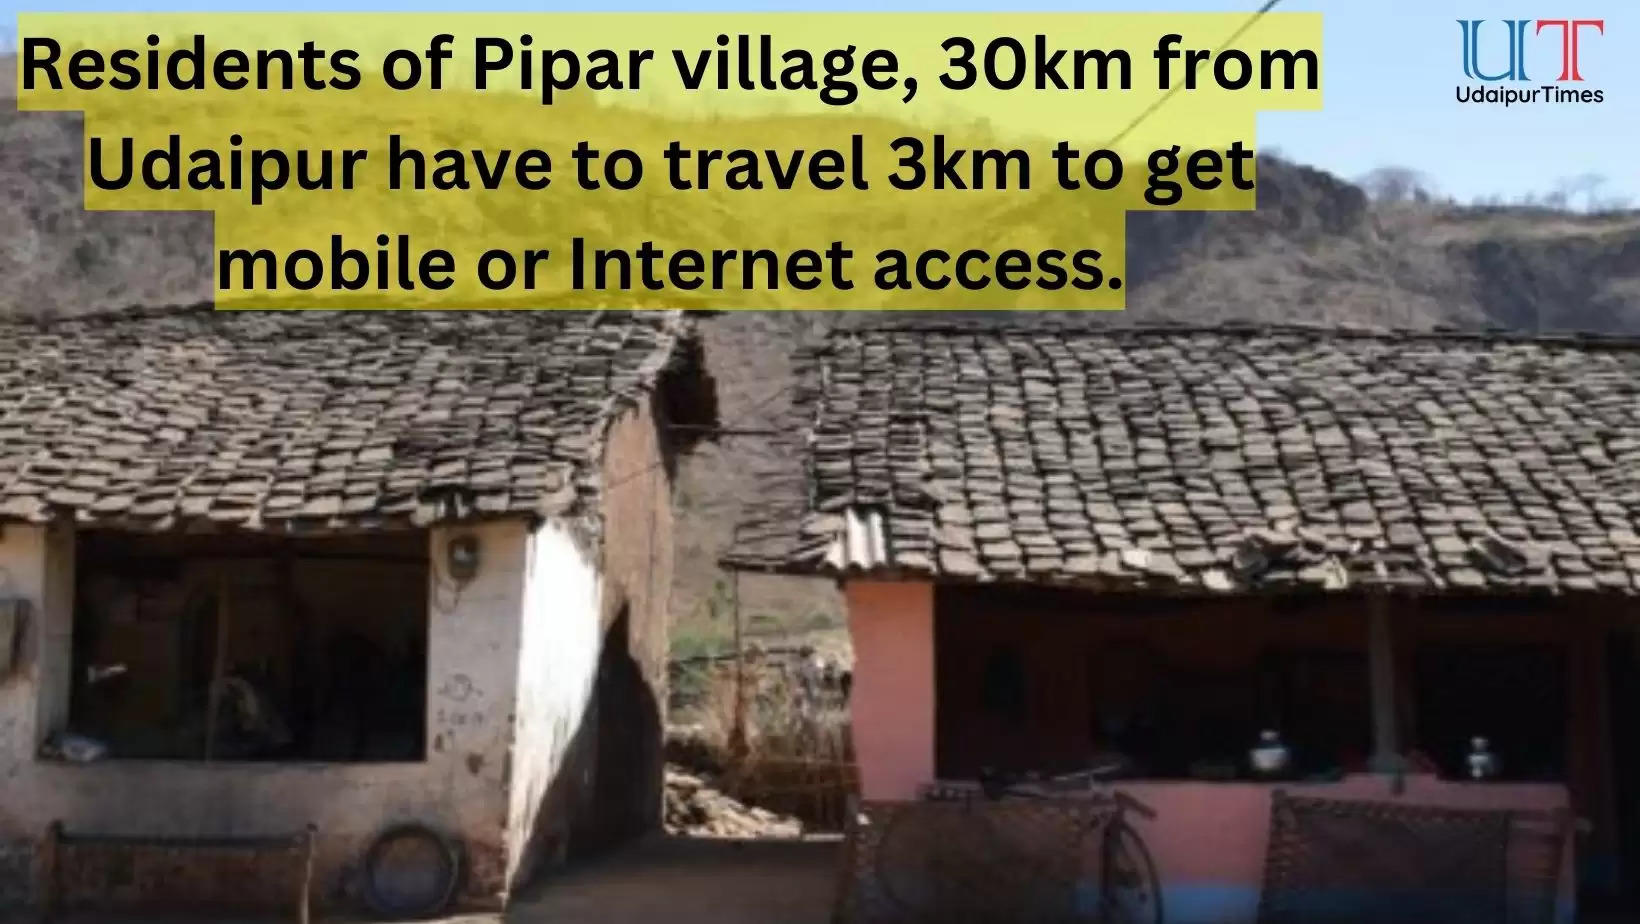 Residents of Pipar village in Udaipur do not have access to mobile or internet services UT Exclusive